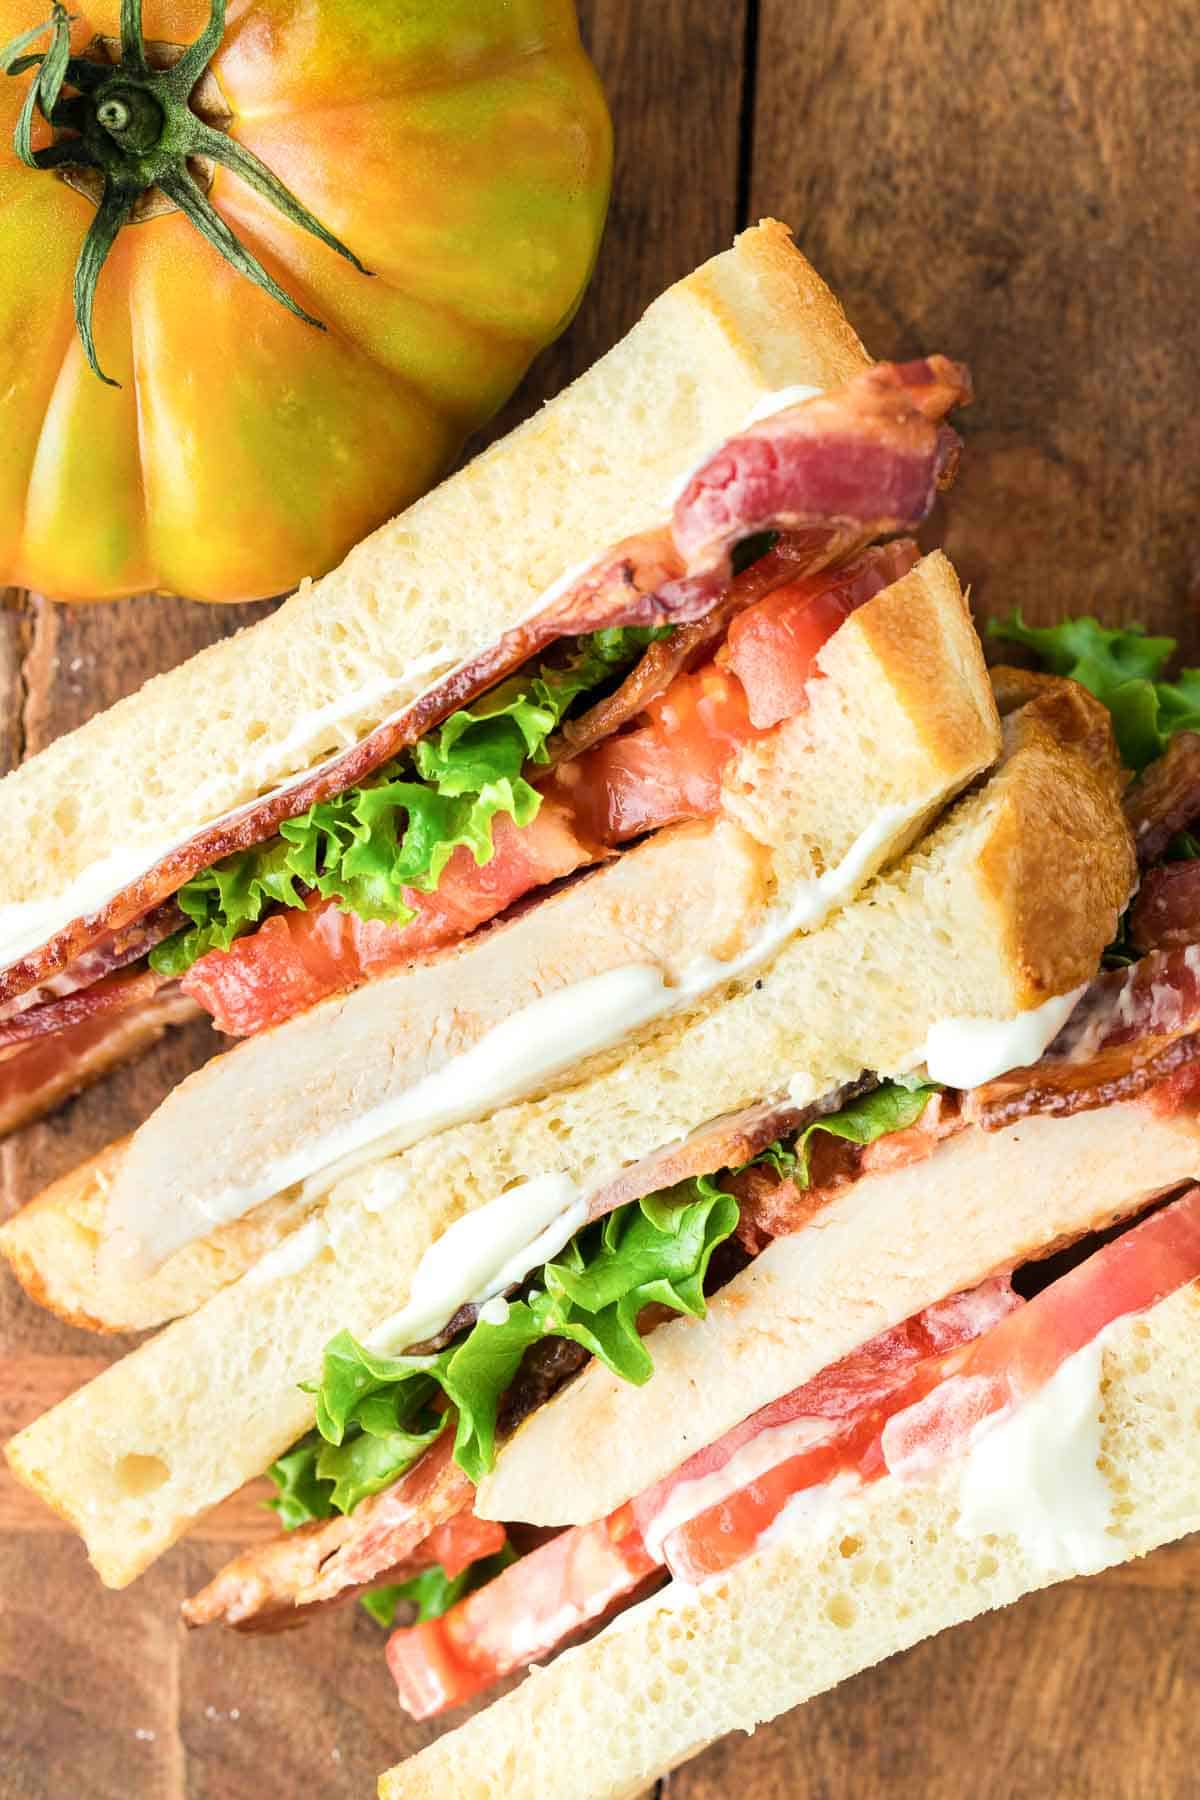 A sandwich with bacon, tomatoes, chicken, and lettuce on a wooden cutting board.